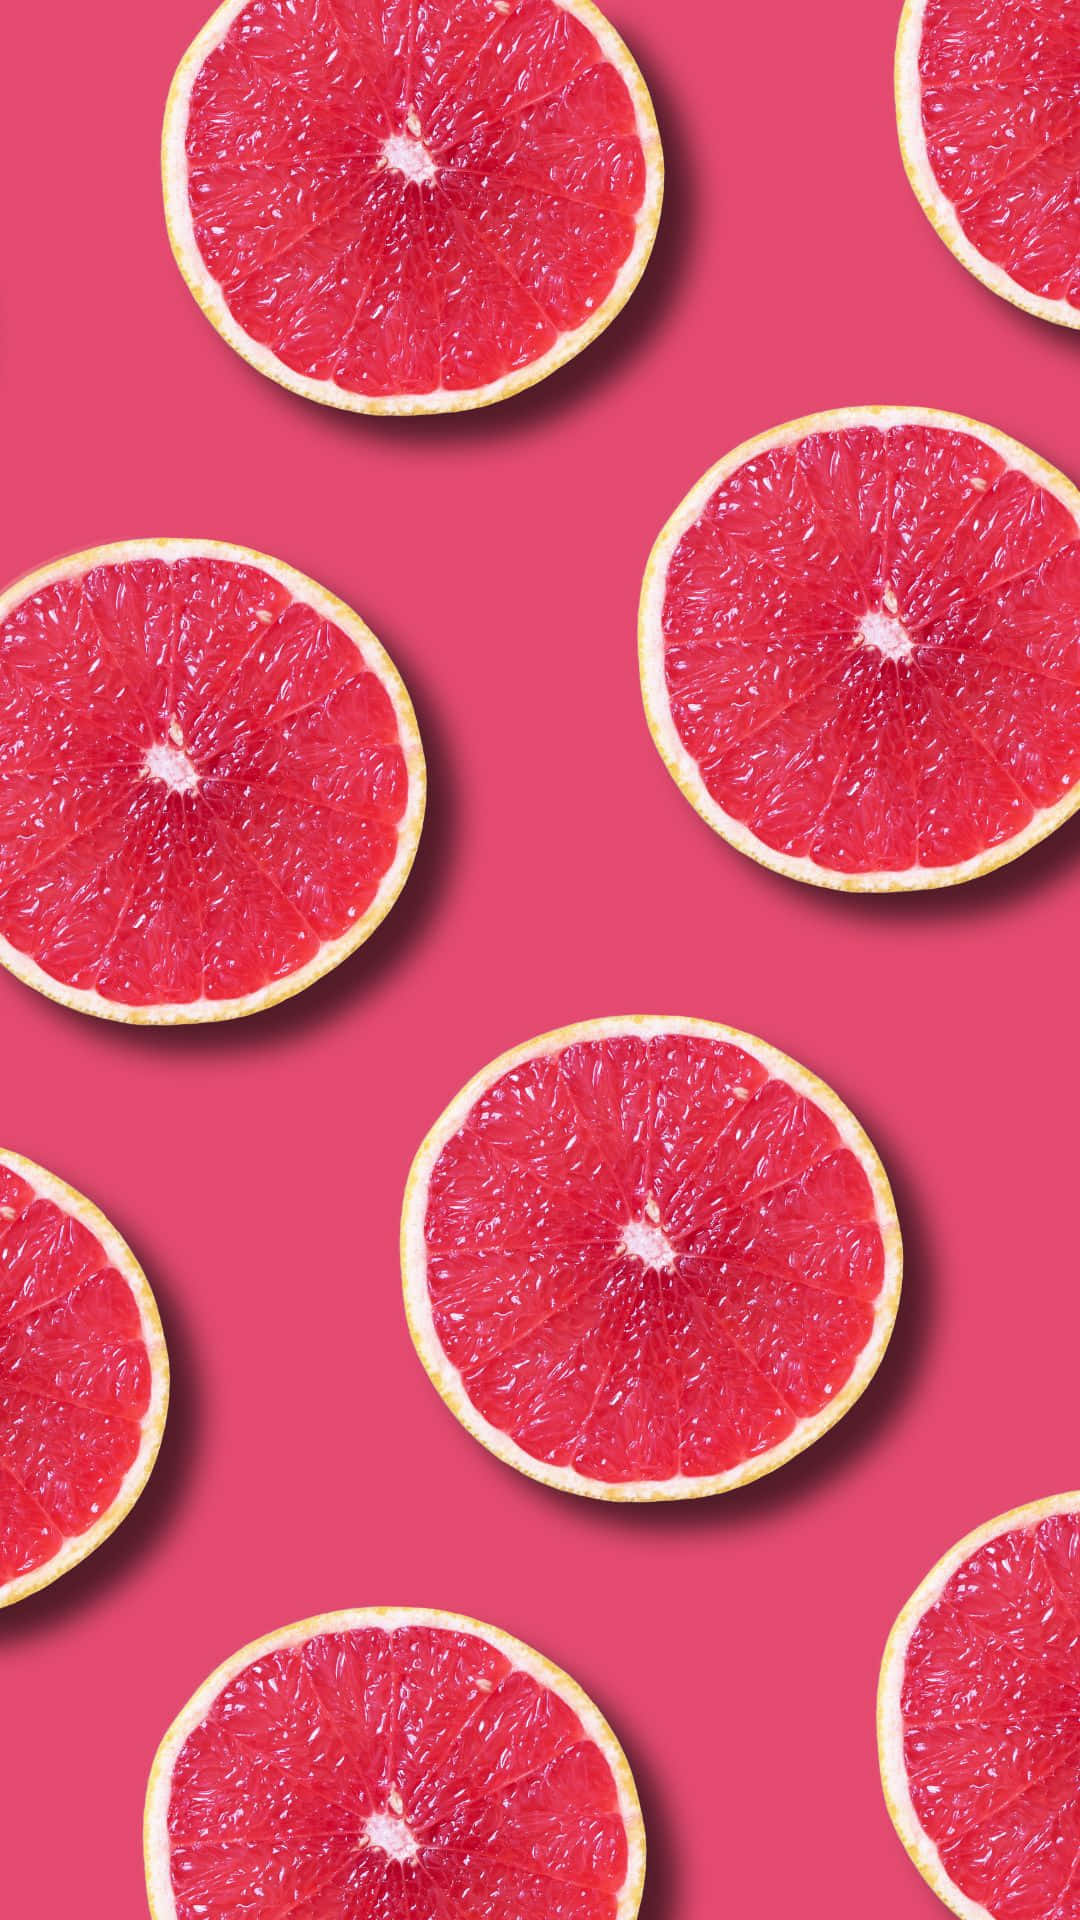 a pattern of grapefruit slices on a pink background